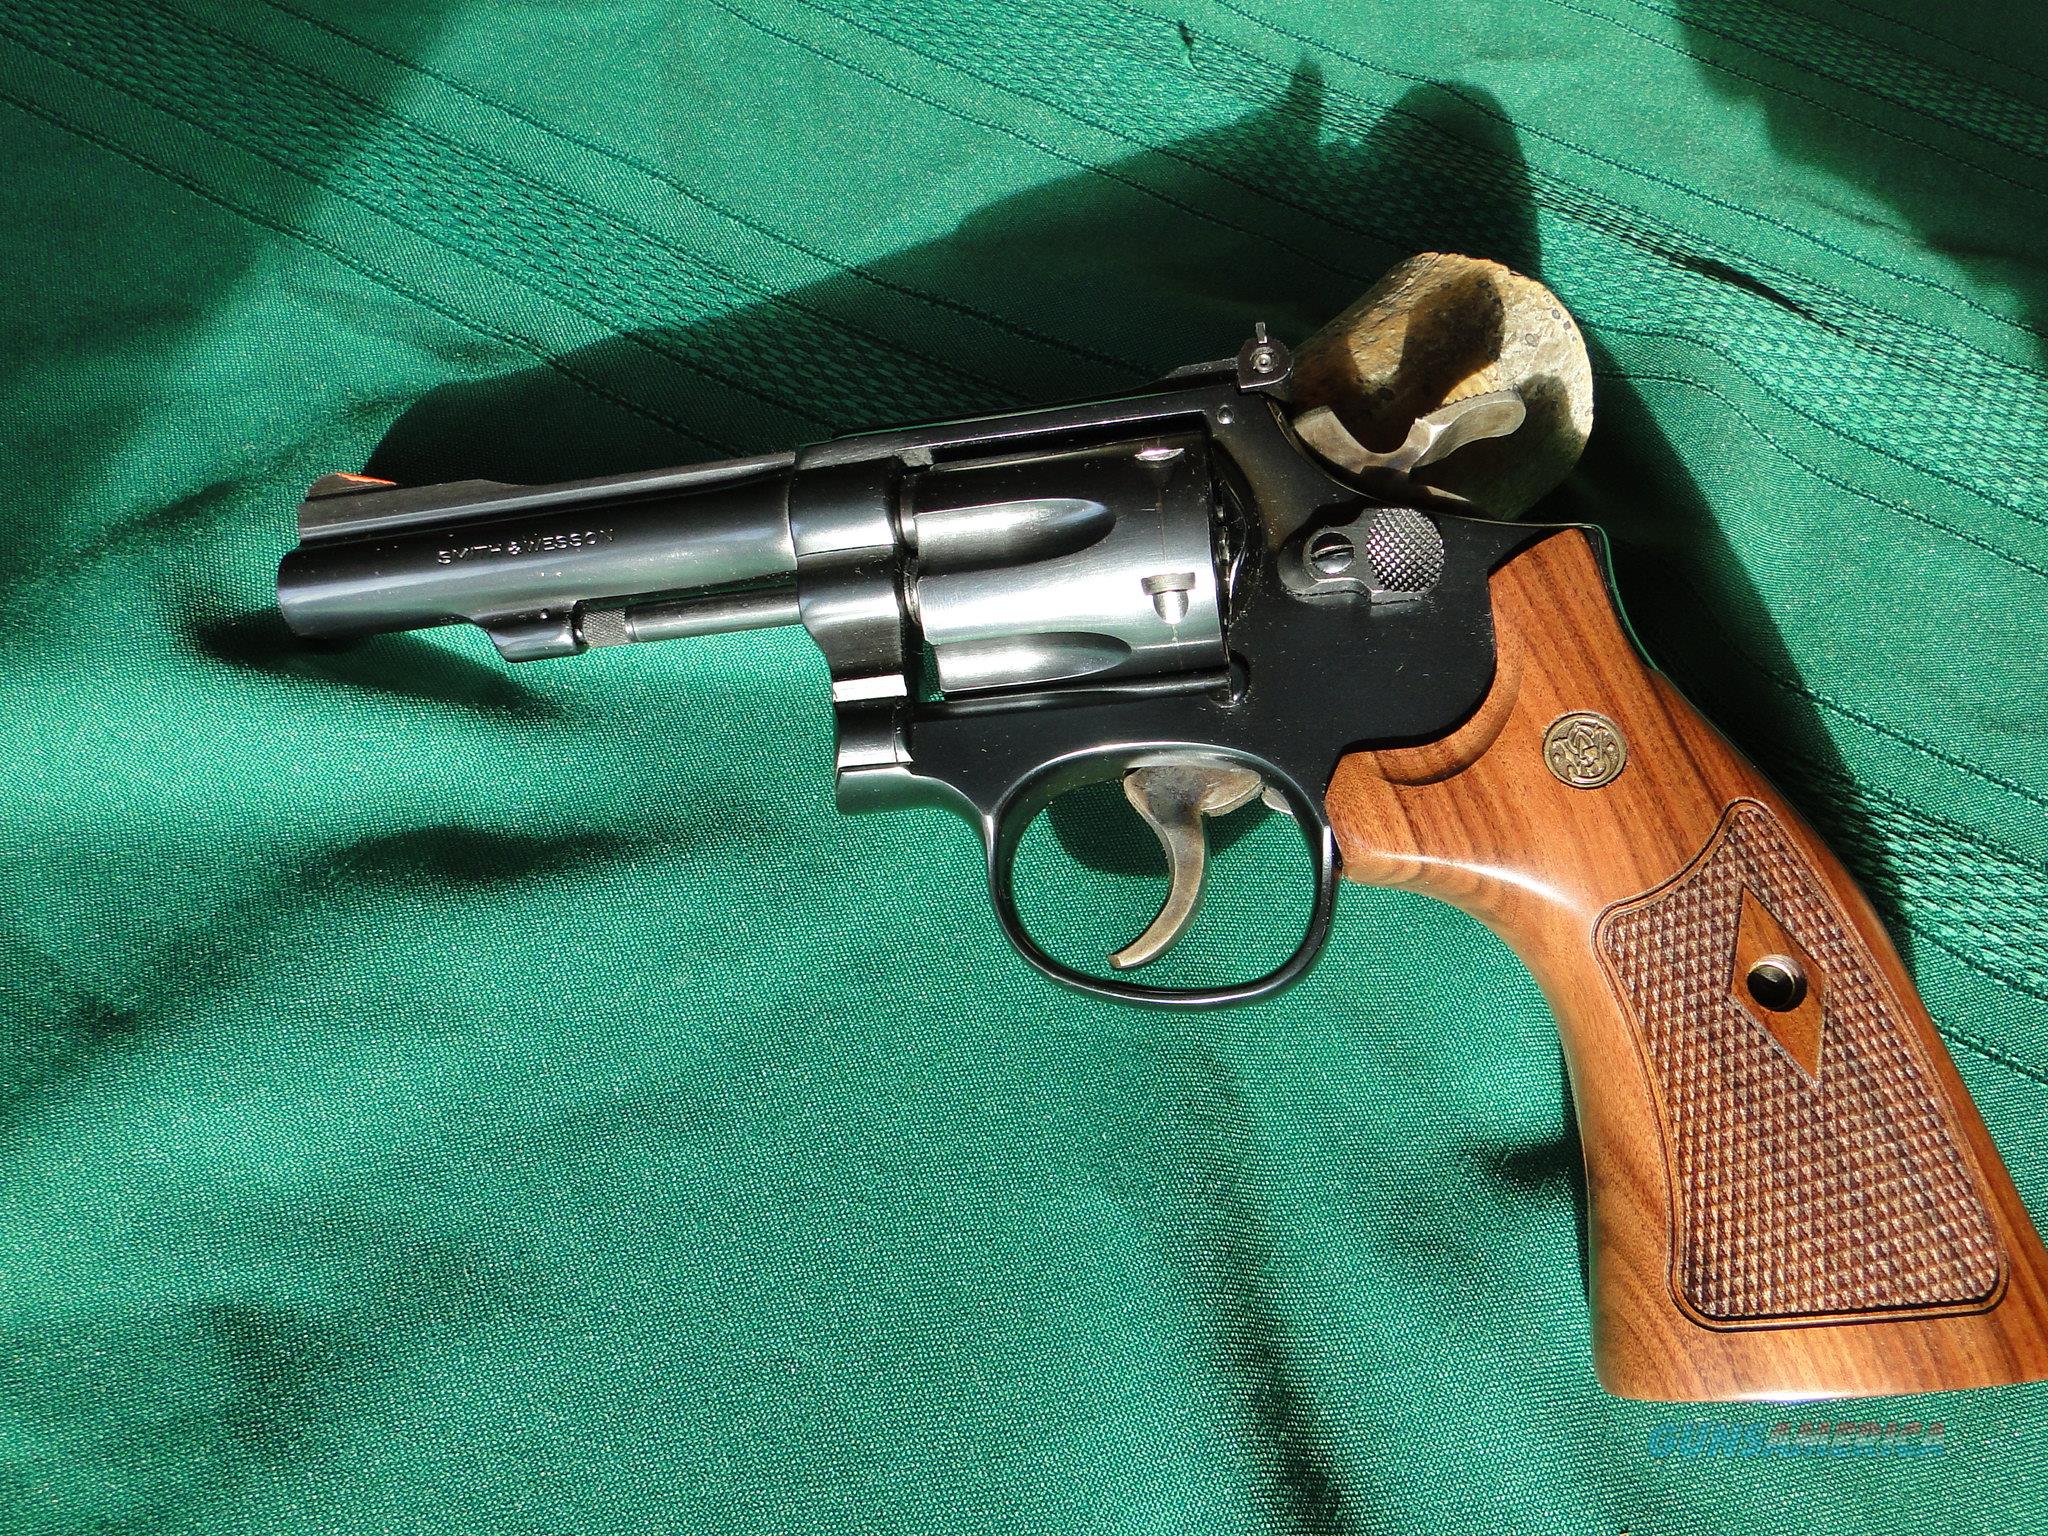 smith and wesson model 18 4 inch 22